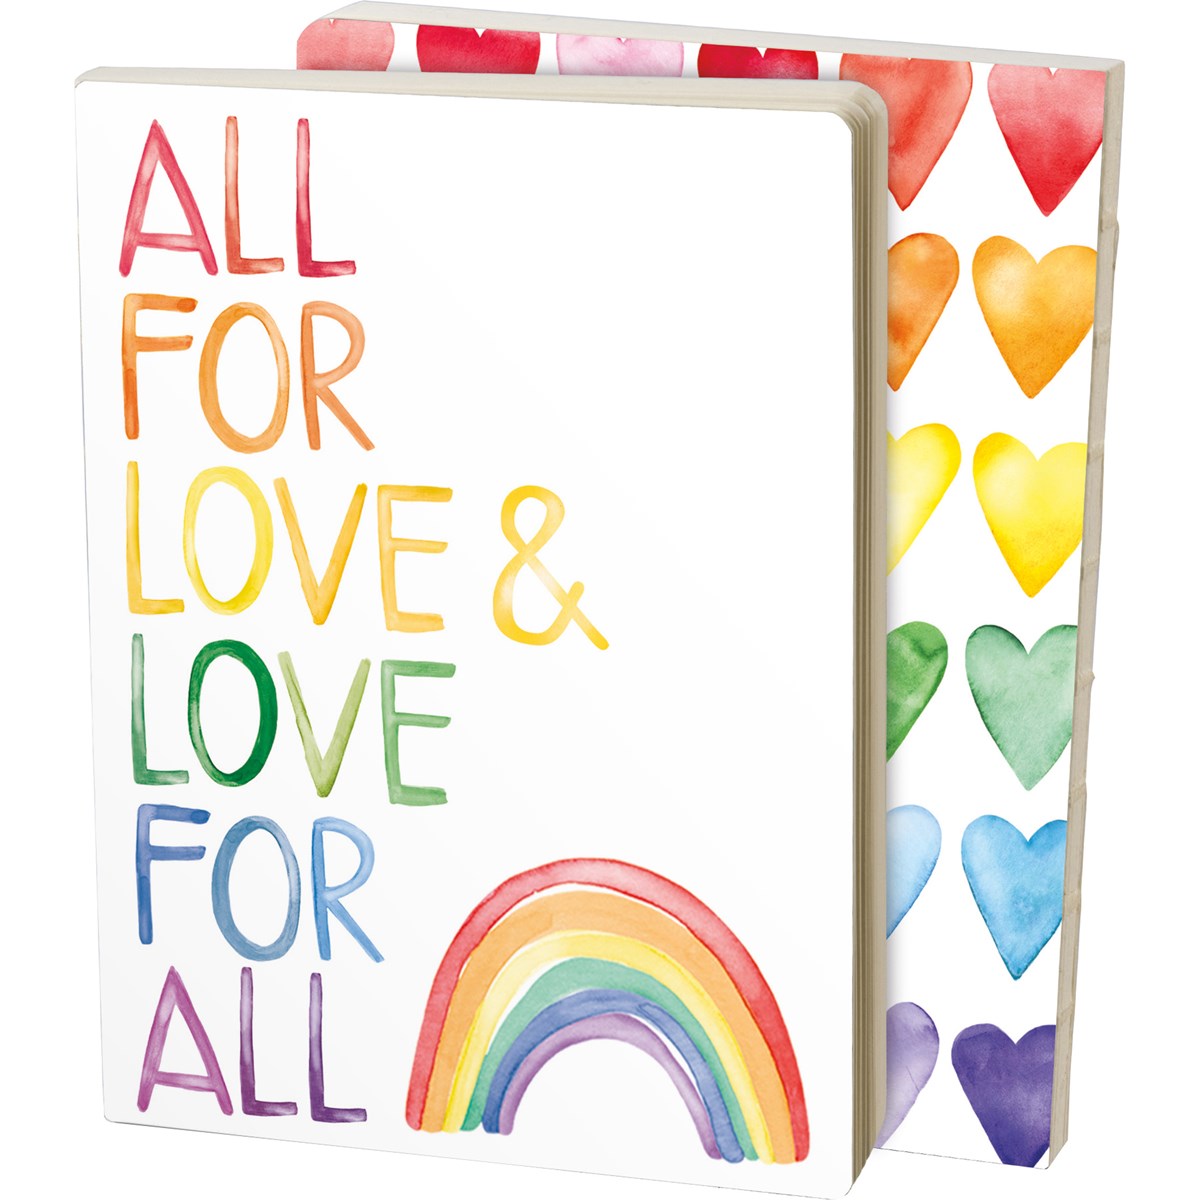 Journal - All For Love Love For All - 5.25" x 7.25" x 0.75" - Paper